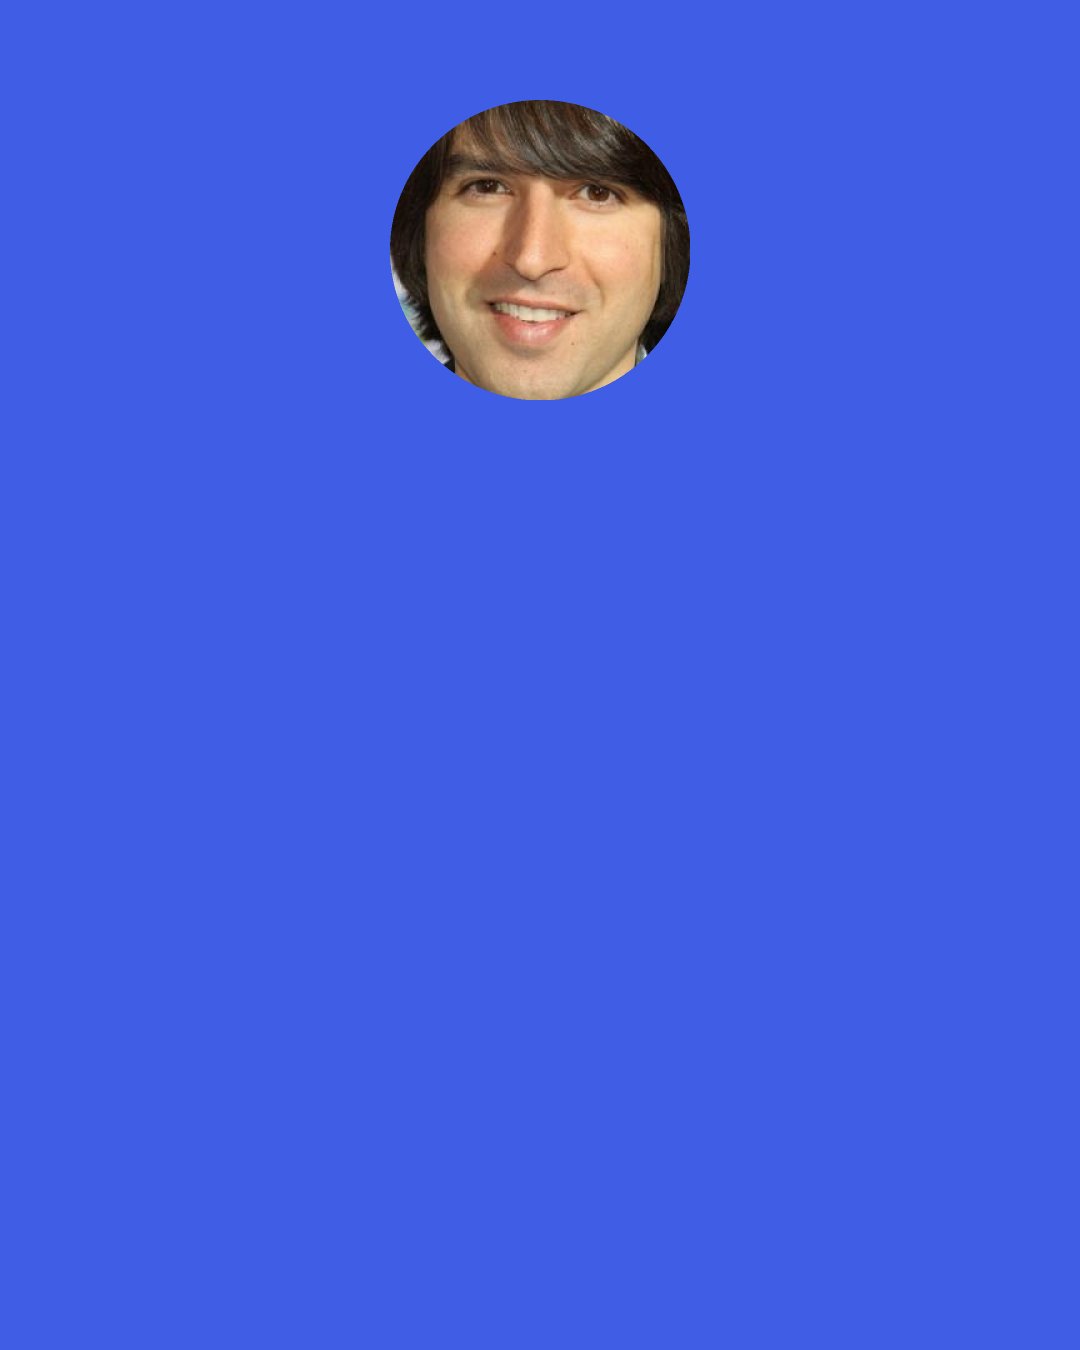 Demetri Martin: I've heard of many chocoholics, but I ain't never seen no "chocohol". We got an epidemic, people: people who like chocolate but don't understand word endings. They're probably "over-workaholled".